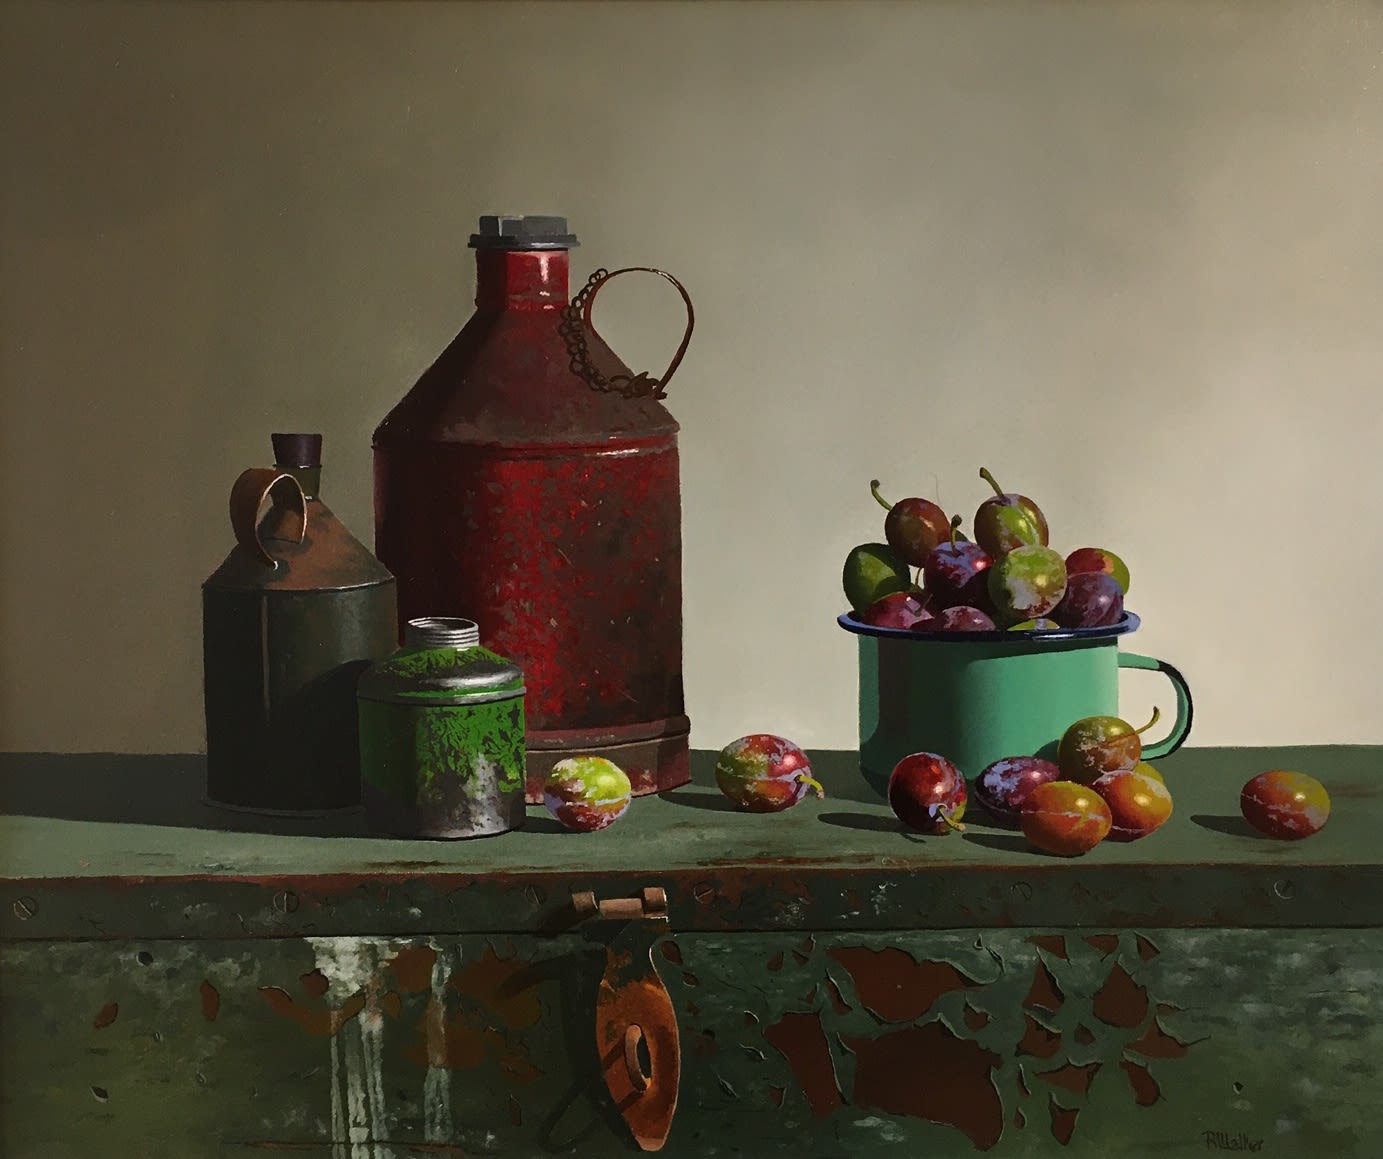 Rob Walker, Cans & Plums